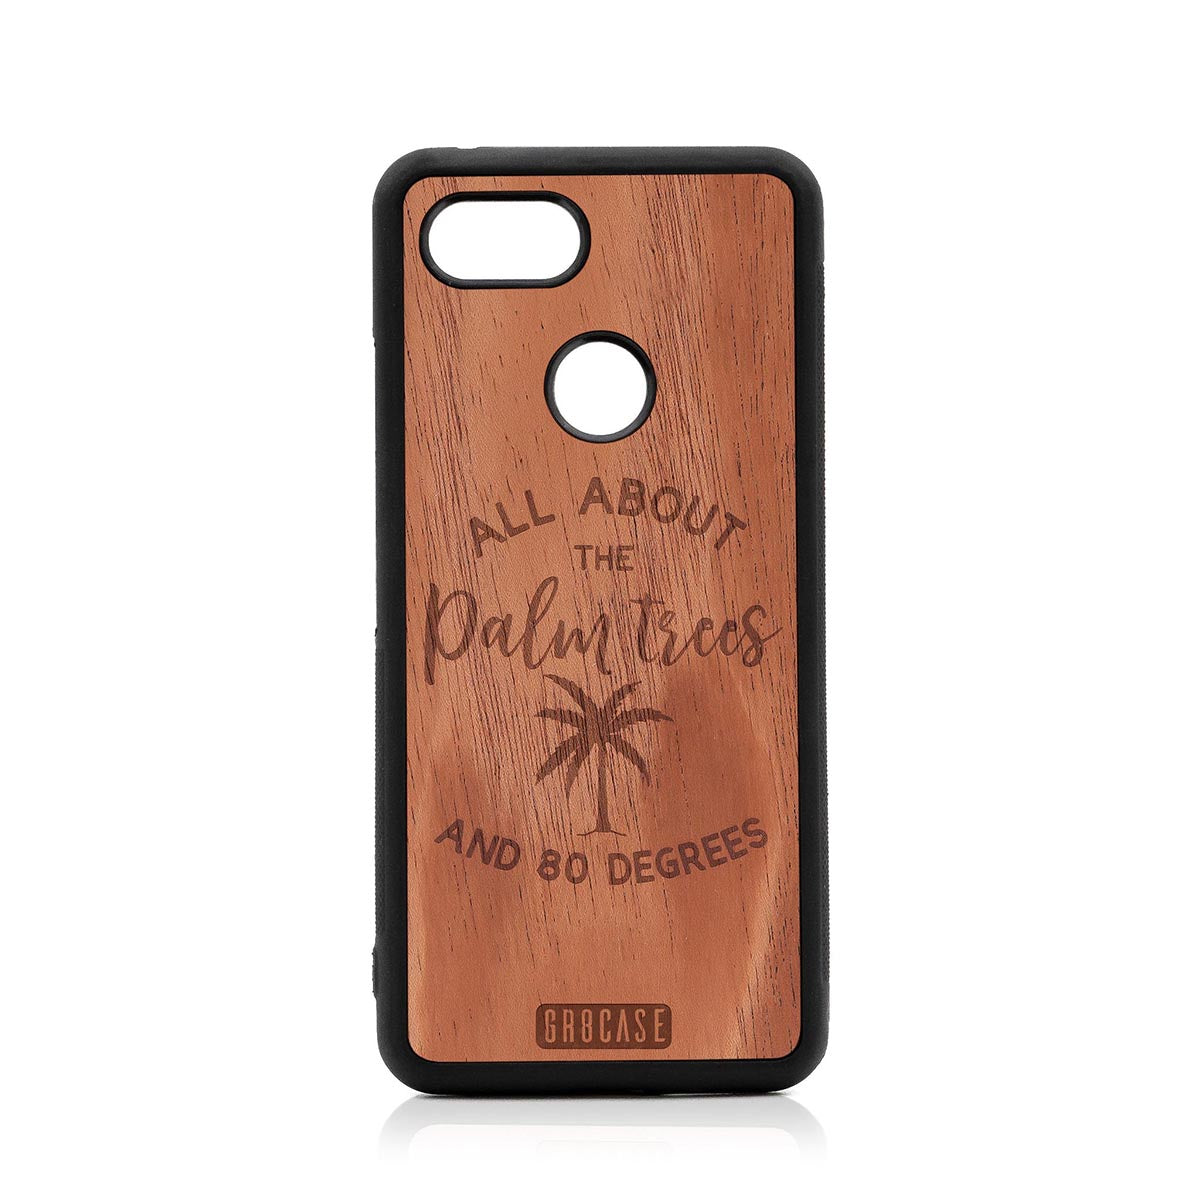 All About The Palm Trees and 80 Degrees Design Wood Case For Google Pixel 3 by GR8CASE